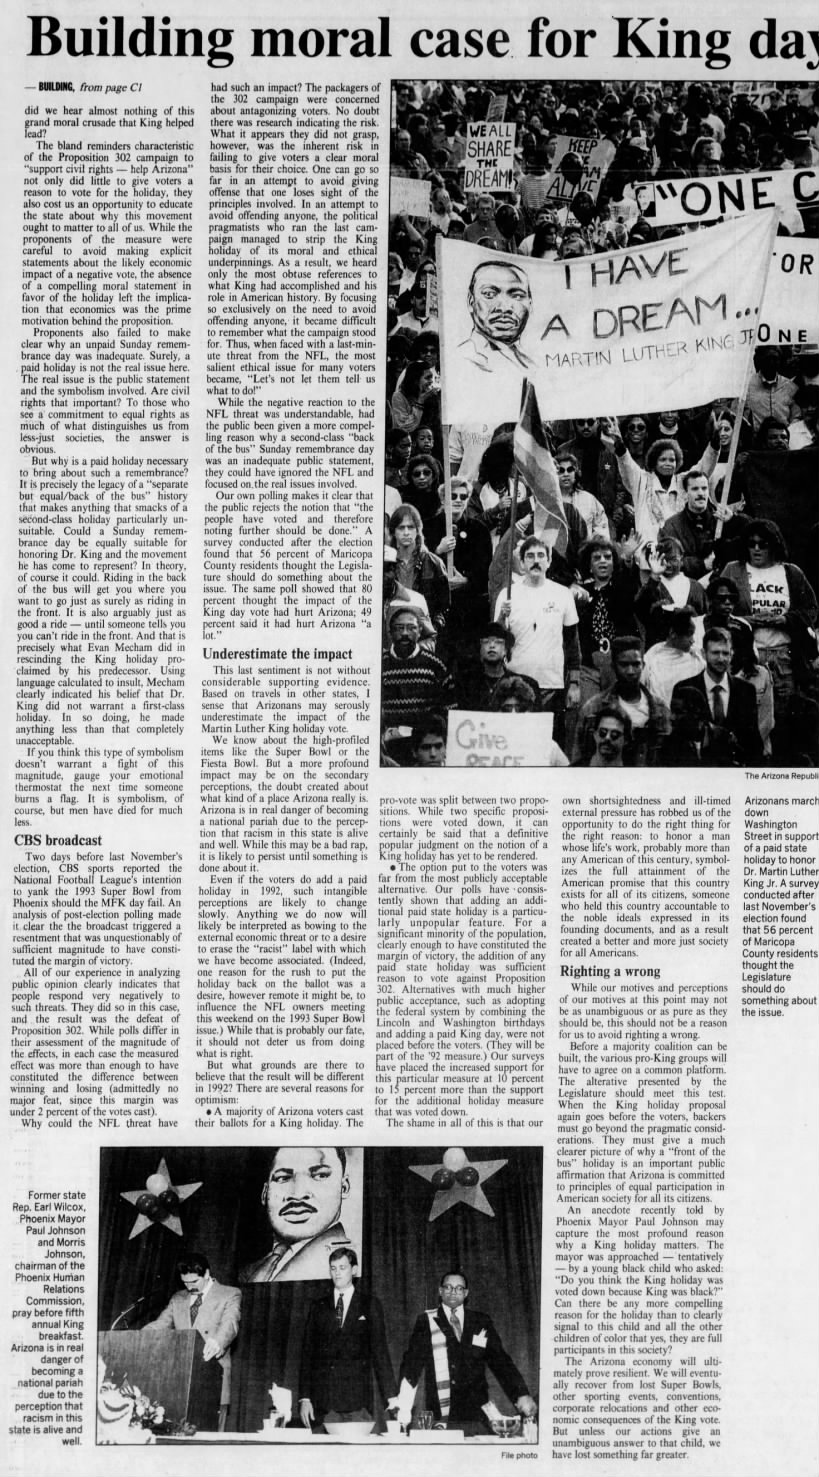 "Building morale case for King day" (Mar 17, 1991)